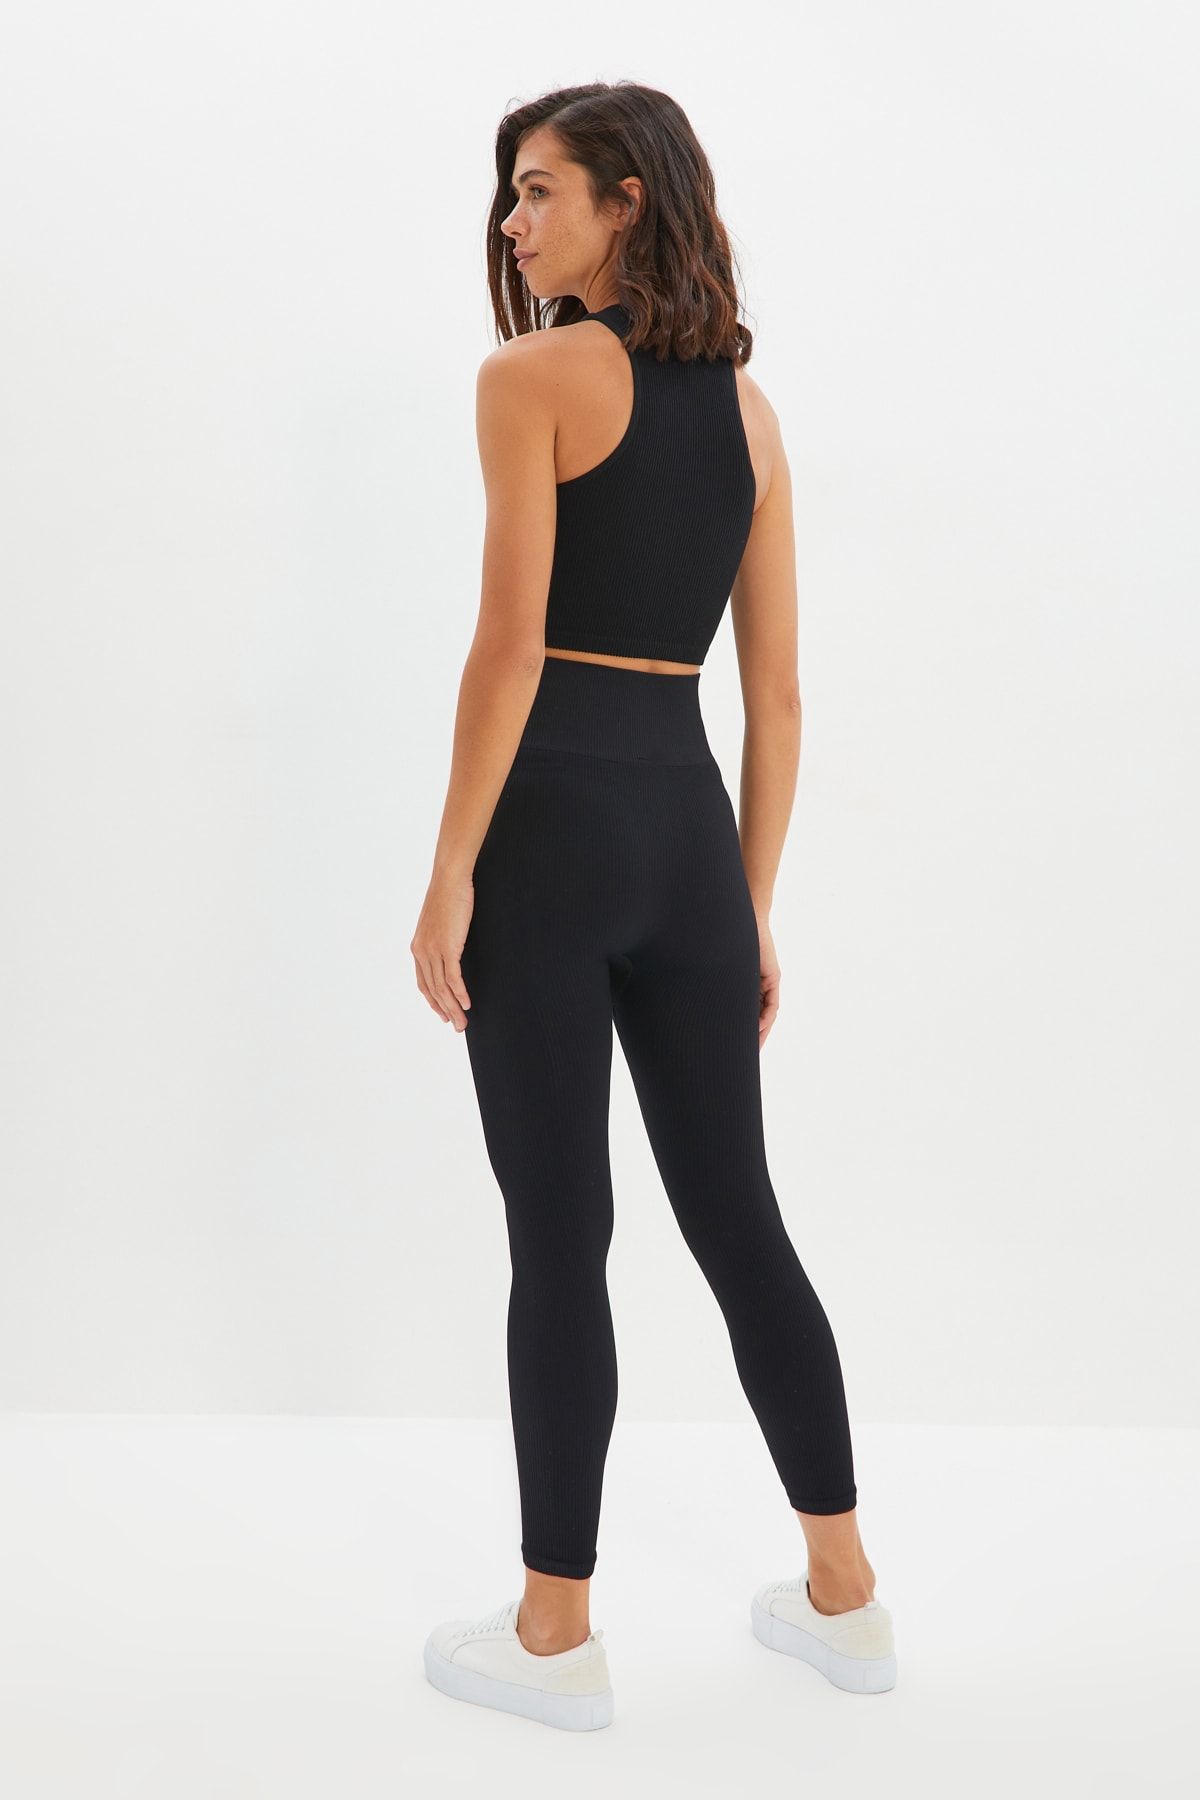 Trendyol Collection Black Seamless/Seamless Ribbed Knitted Sports Leggings  THMAW22TA0060 - Trendyol